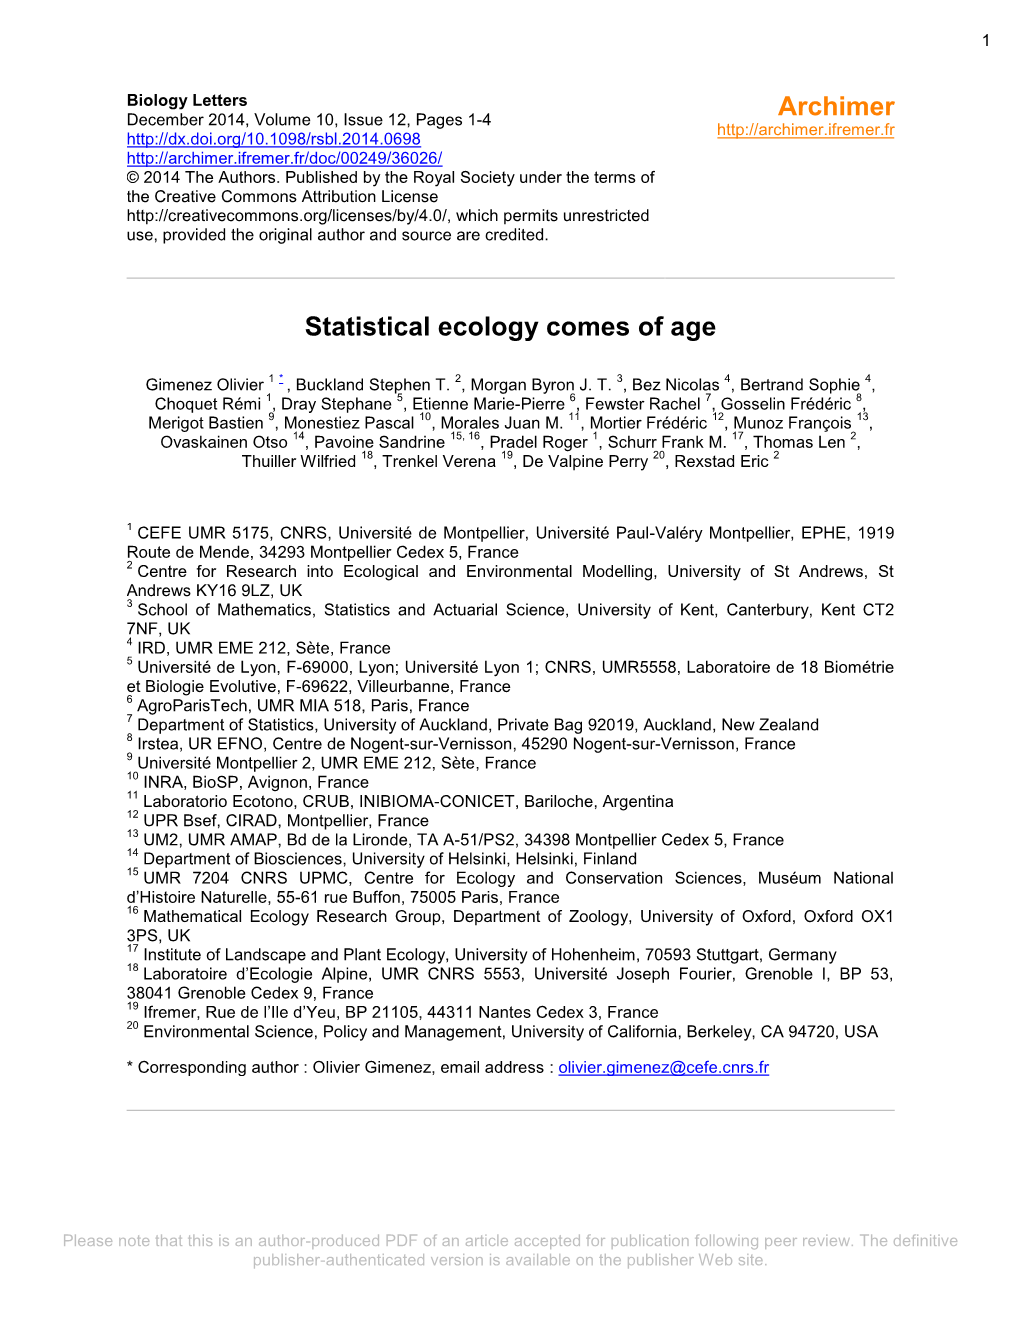 Statistical Ecology Comes of Age